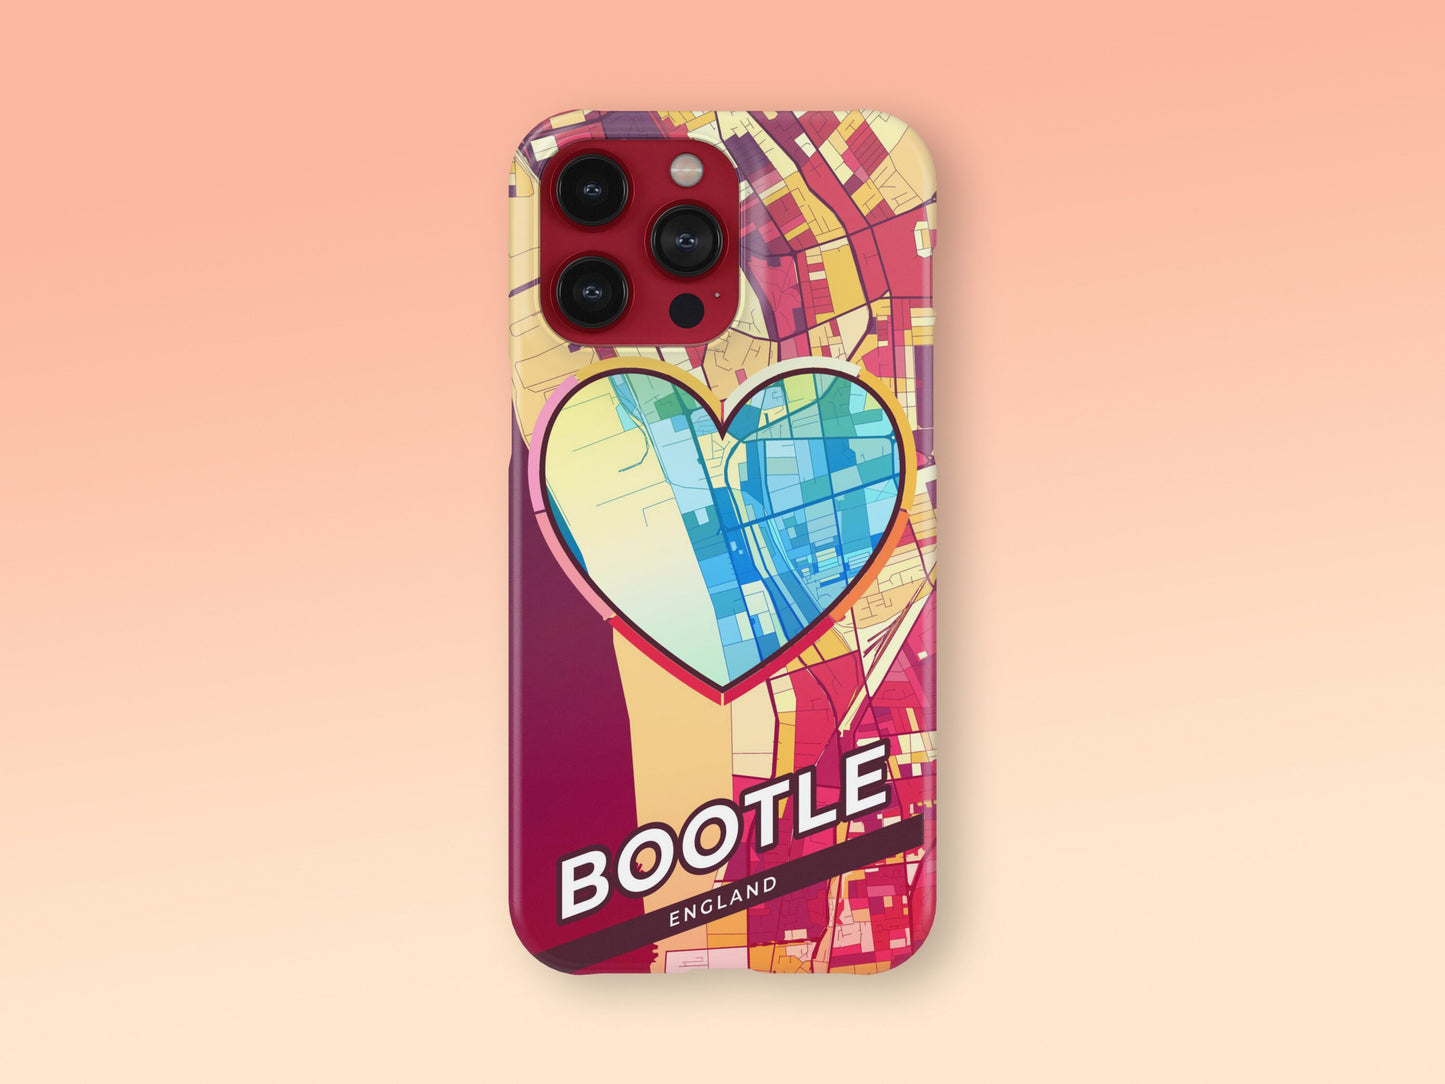 Bootle England slim phone case with colorful icon. Birthday, wedding or housewarming gift. Couple match cases. 2